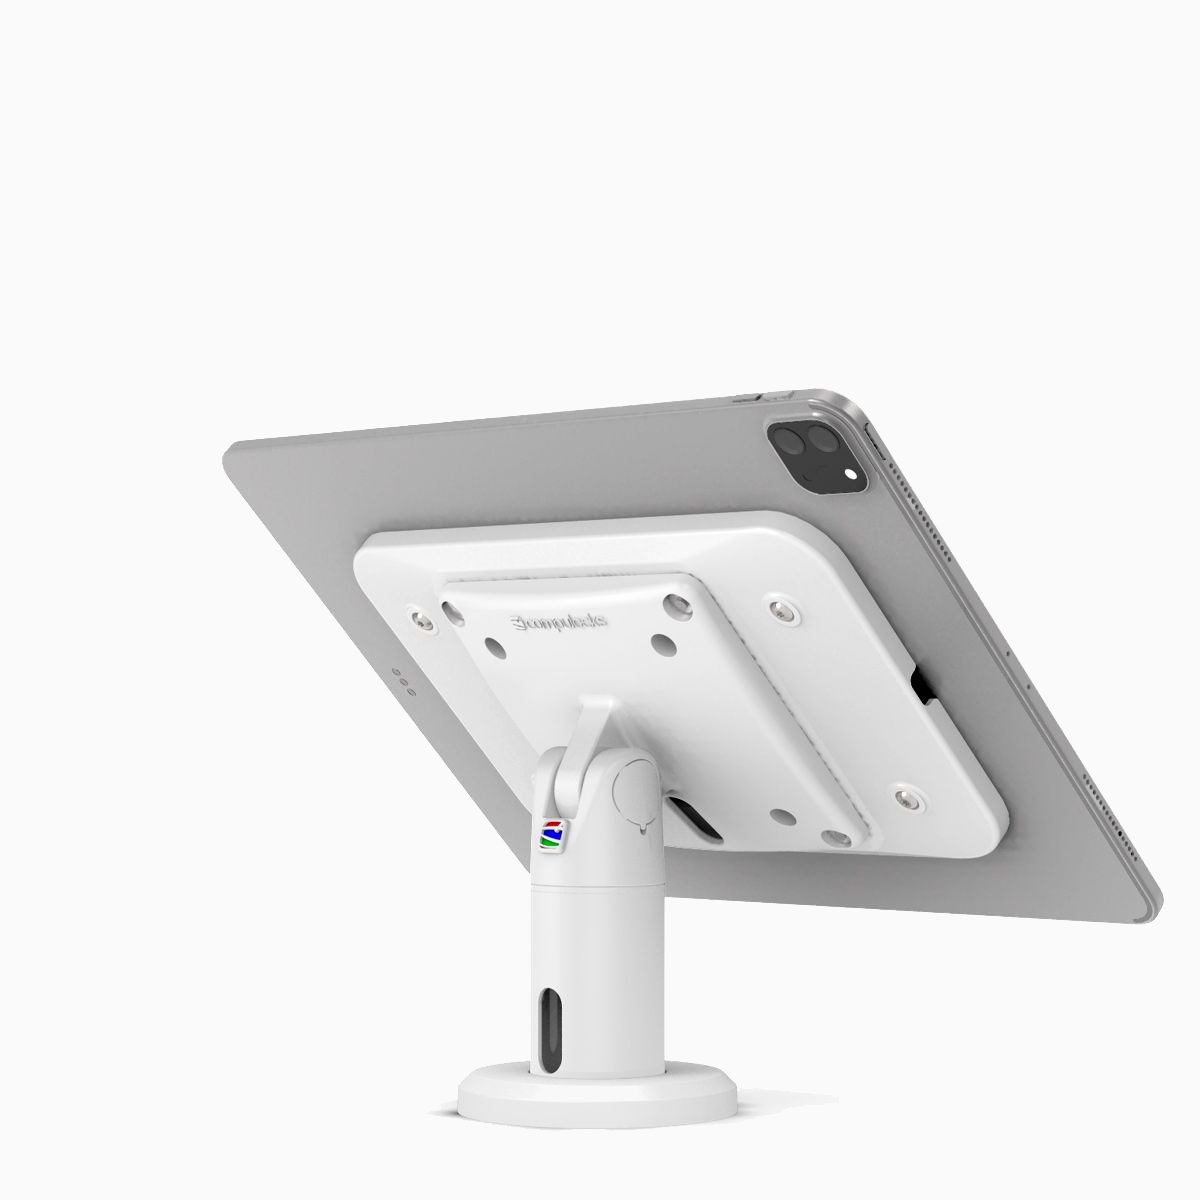 Maclocks Counter Stand with Invisible Universal Tablet Mount